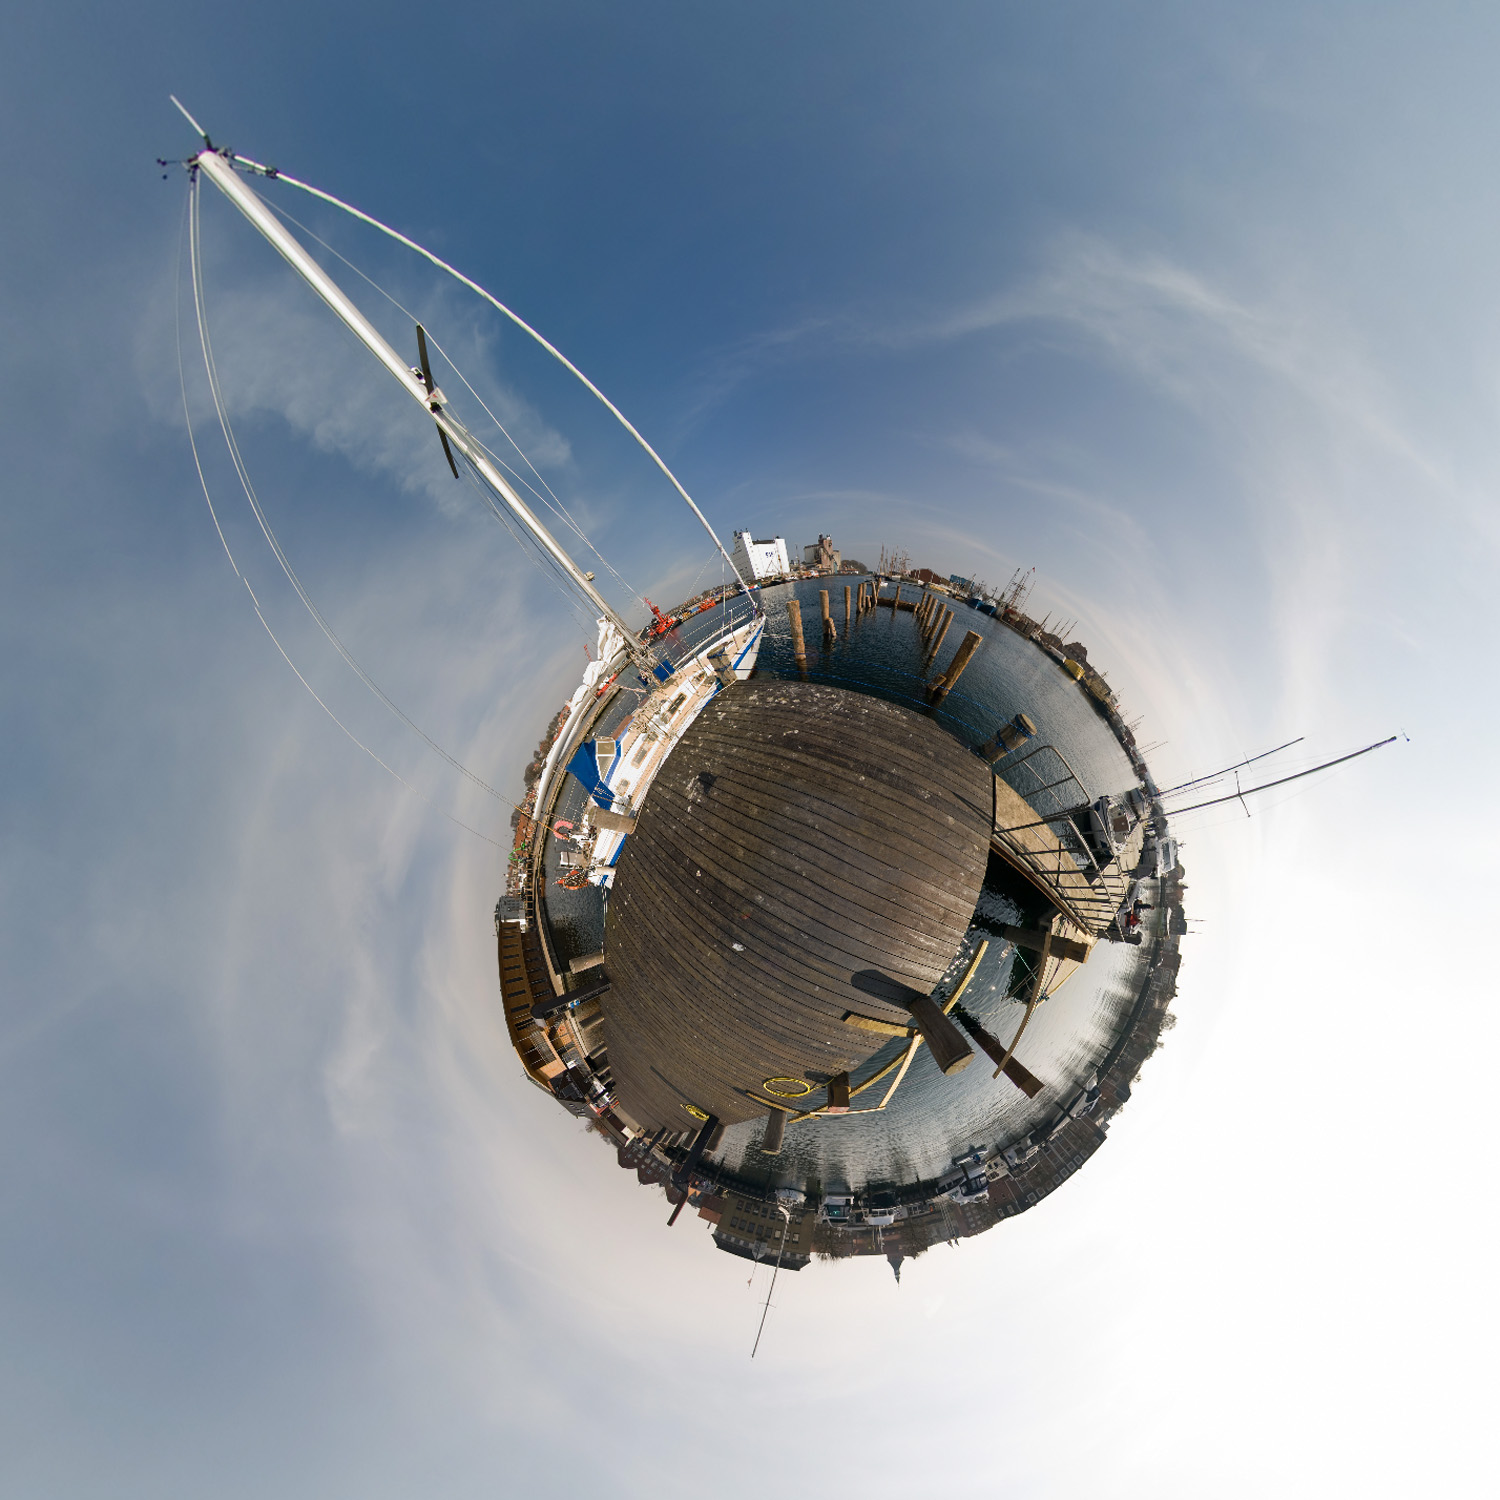 Panorama 017 - Little Planet